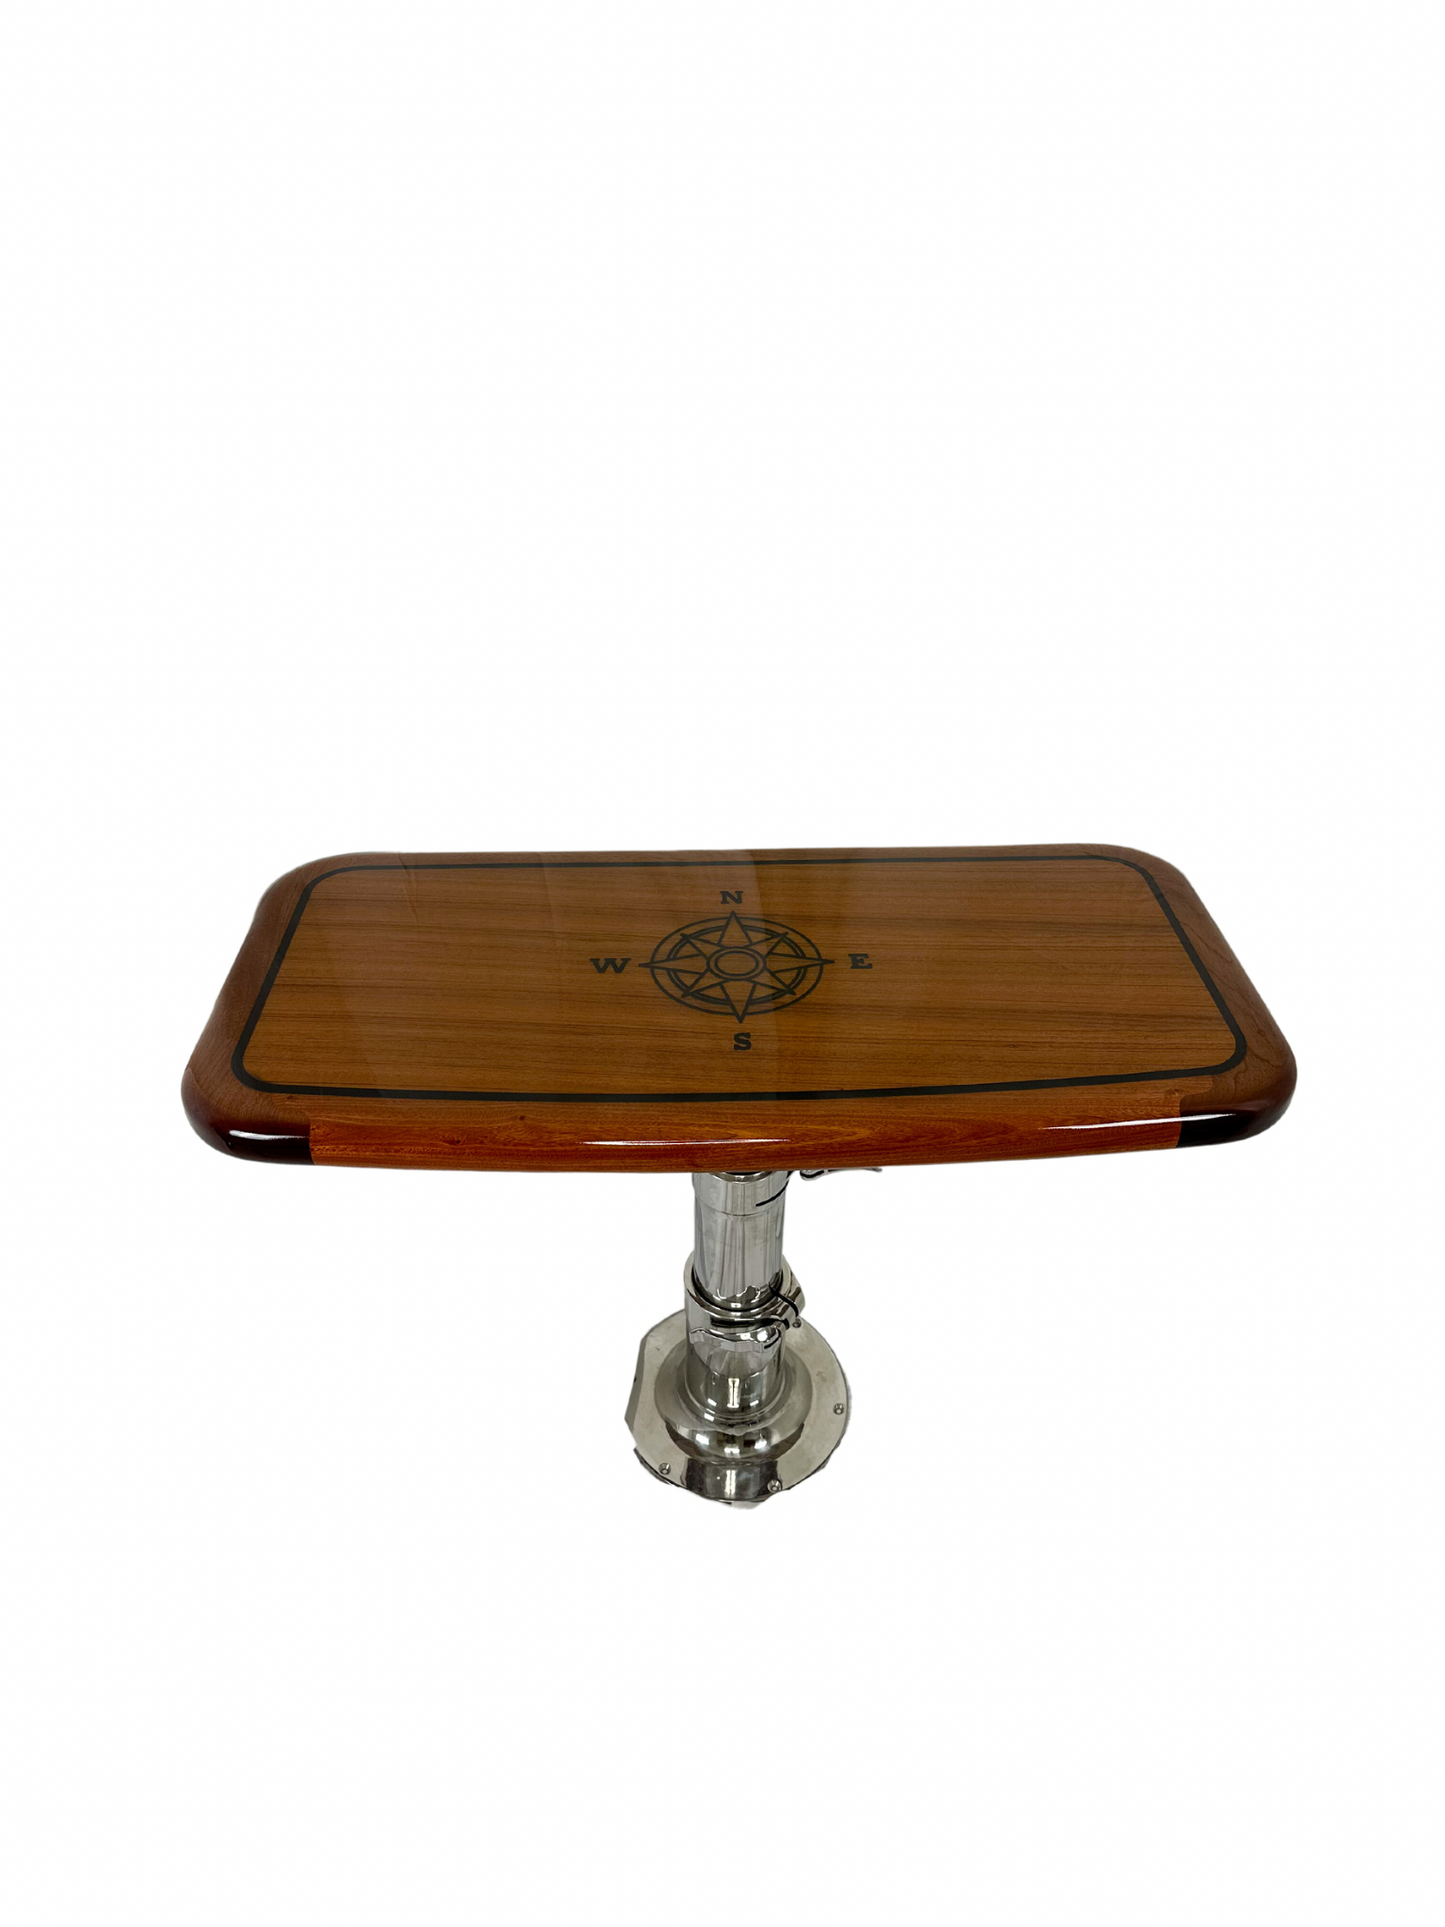 40" x 19" Teak Table with Black Compass Rose